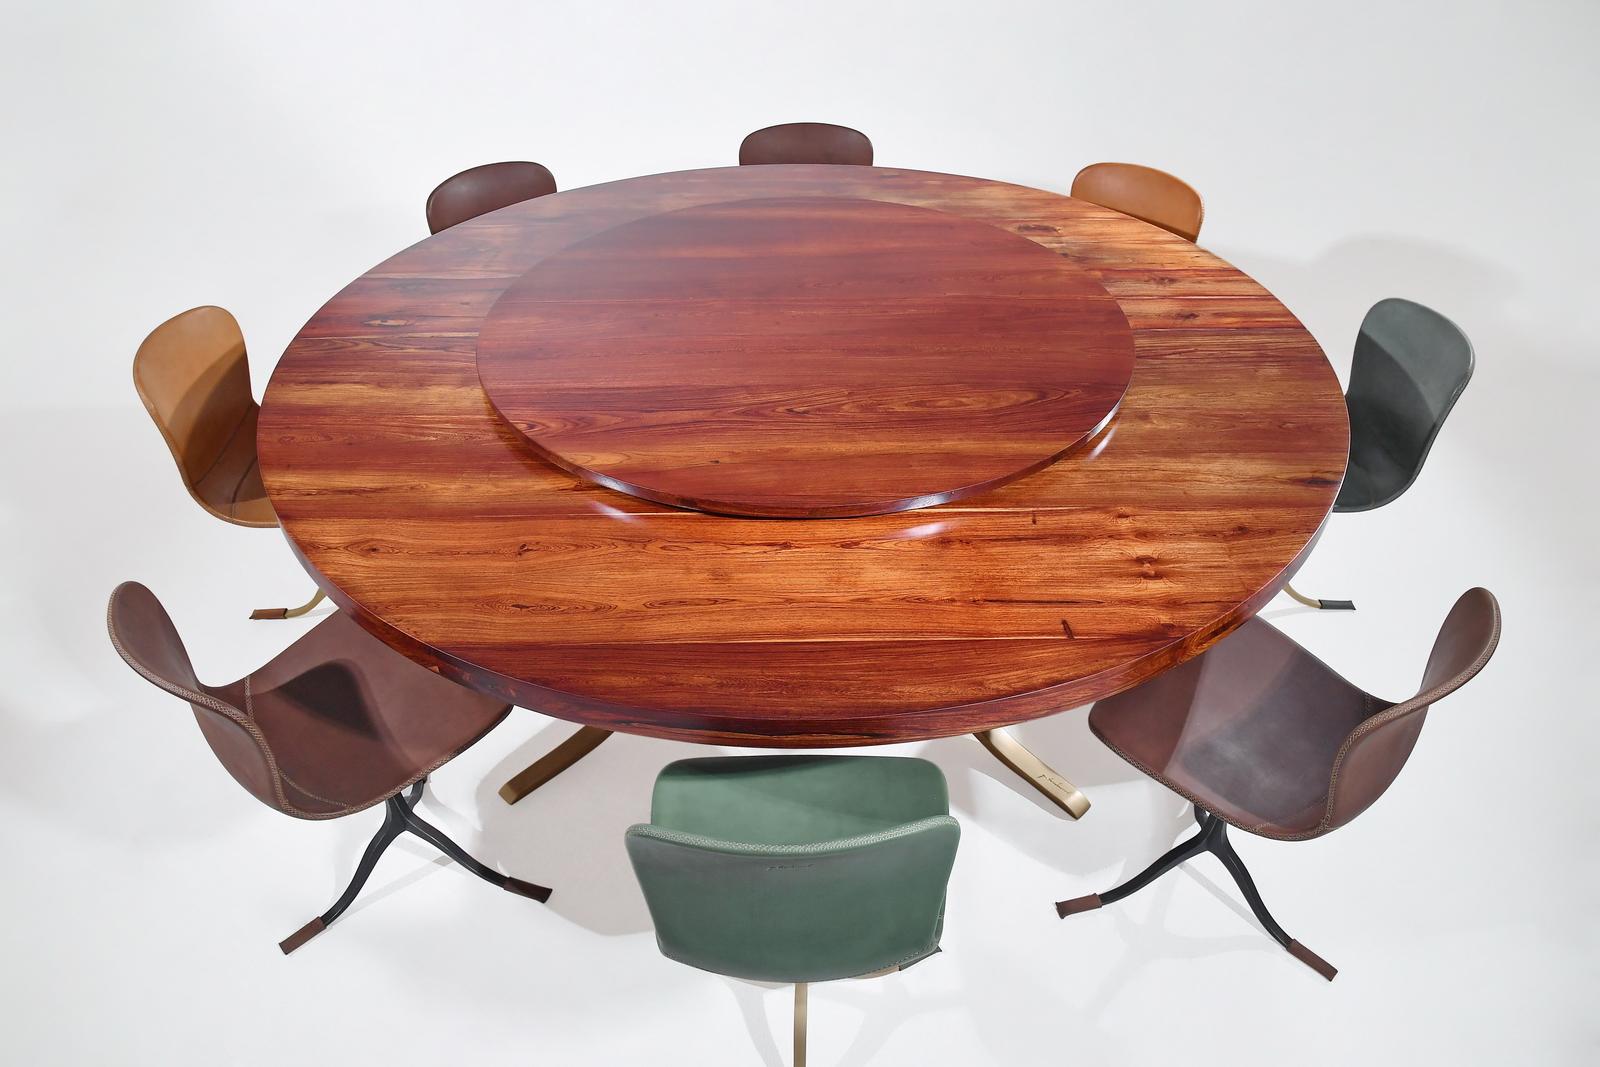 Cast Bespoke Round Table, Reclaimed Hardwood, Brass Base by P. Tendercool For Sale